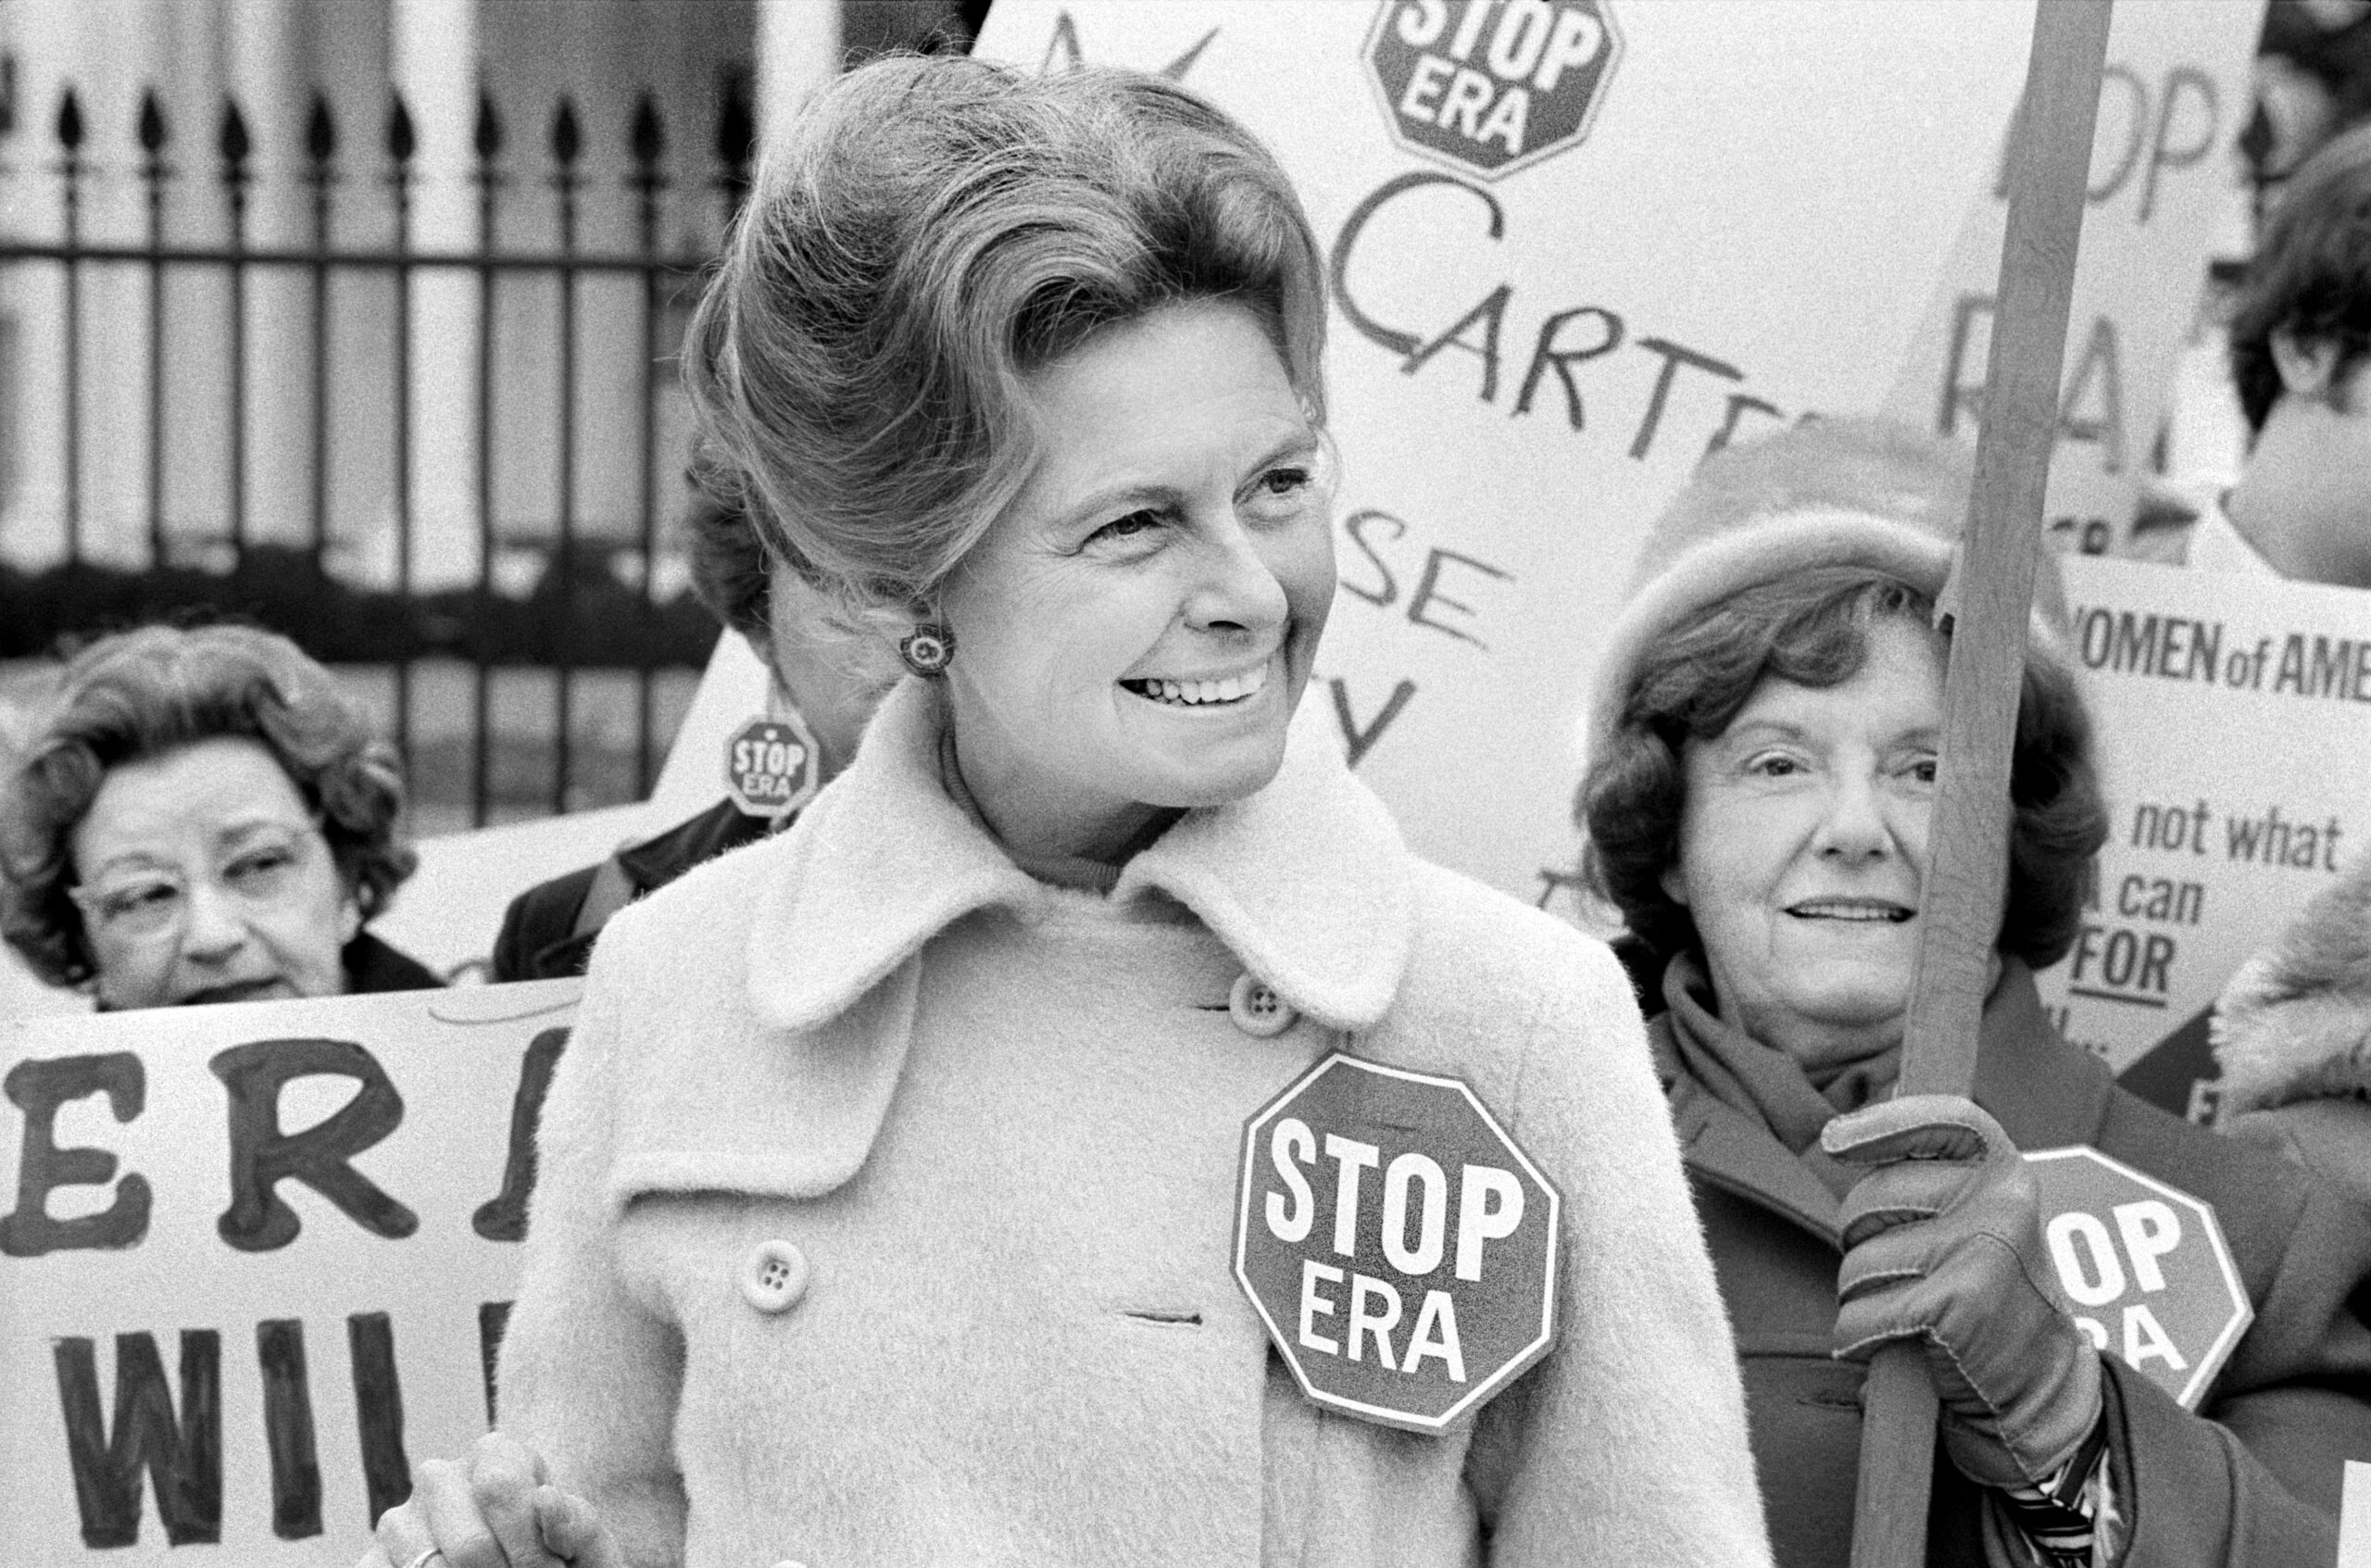 Activist Phyllis Schafly wearing a "Stop ERA" badge, demonstrating with other Women against the Equal Rights Amendment in front of the White House, Washington, D.C., USA, Warren K. Leffler, February 4, 1977